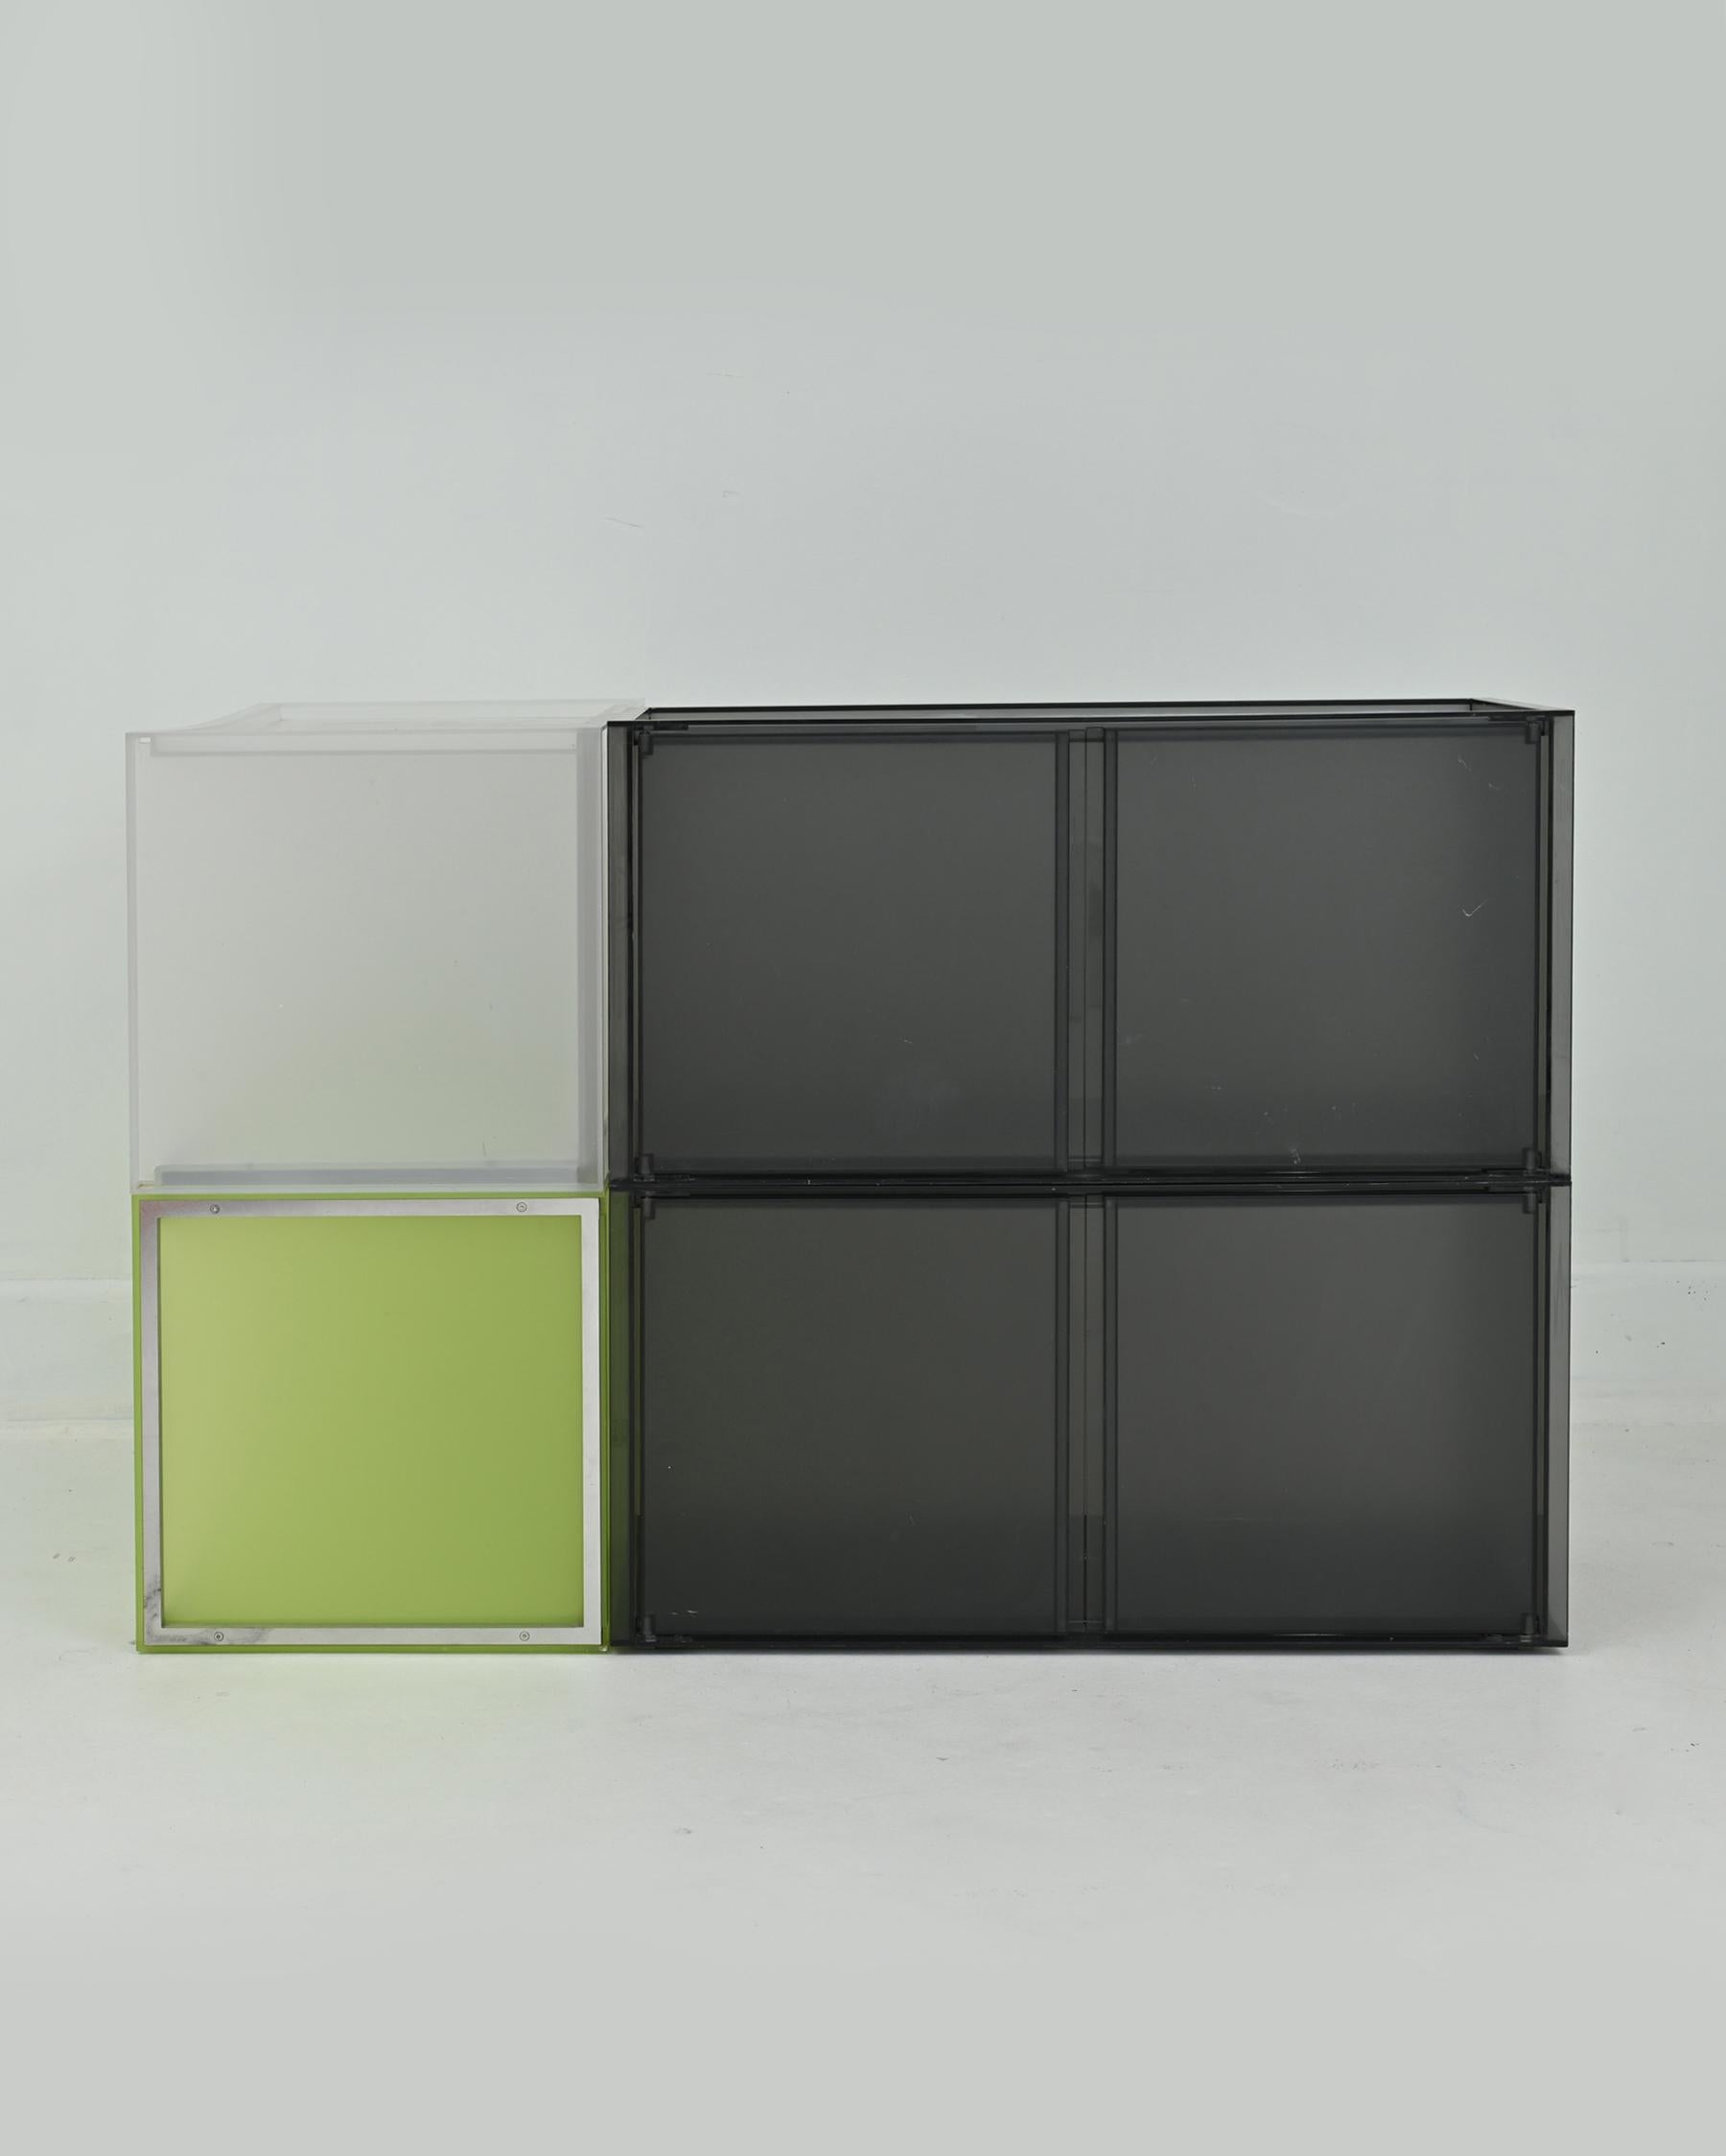 1990s Acrylic Resin and Steel “One” Wall Unit by Piero Lissoni for Kartell For Sale 1